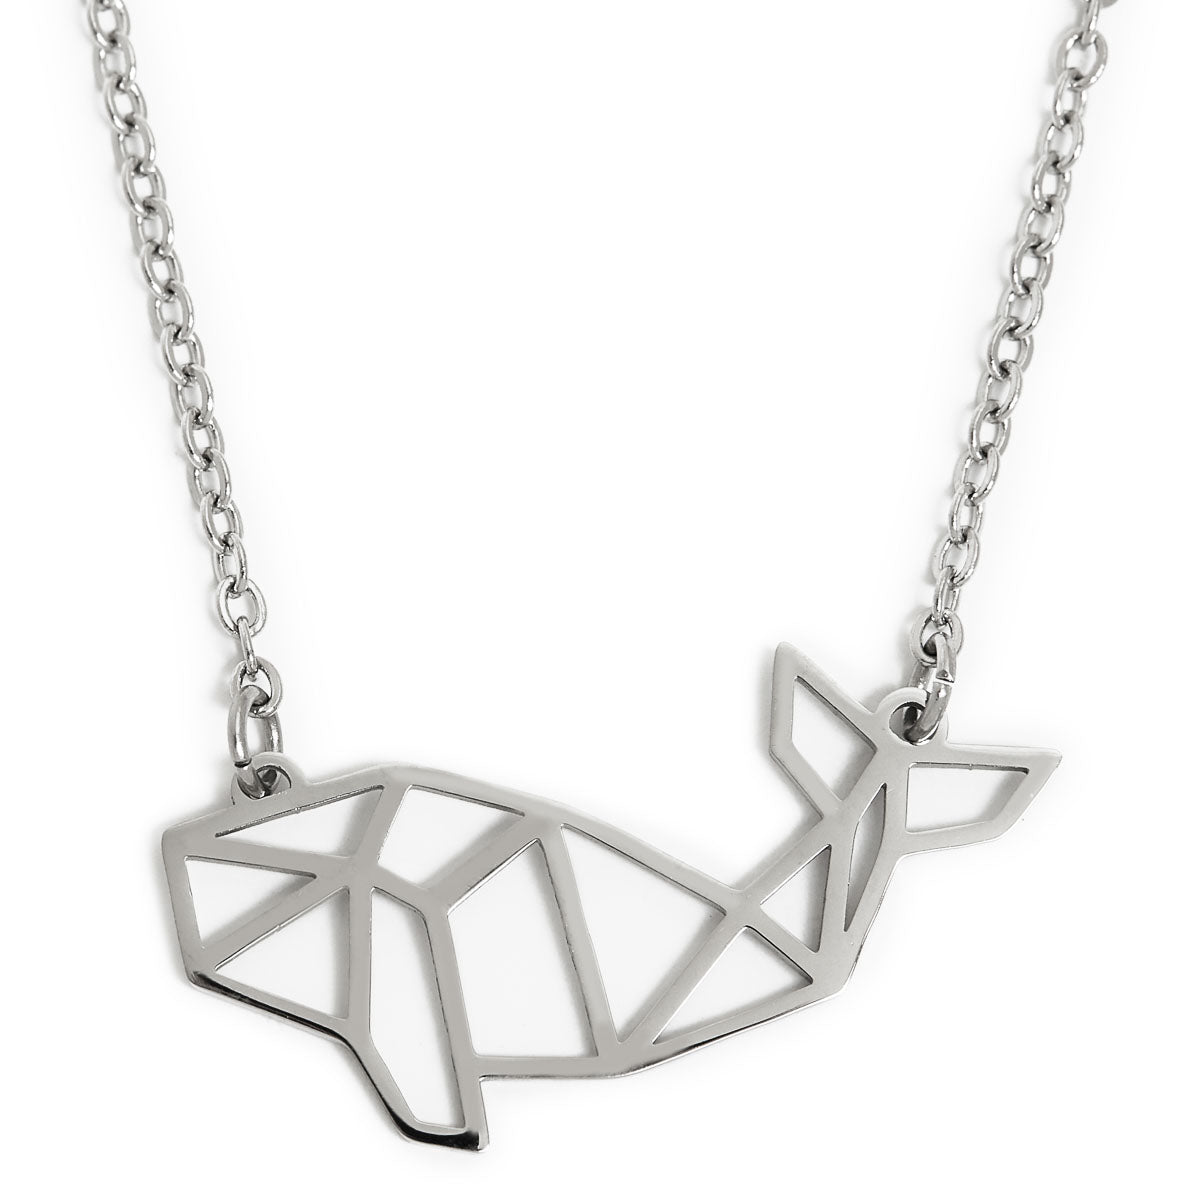 Whale Geometric Necklace Silver